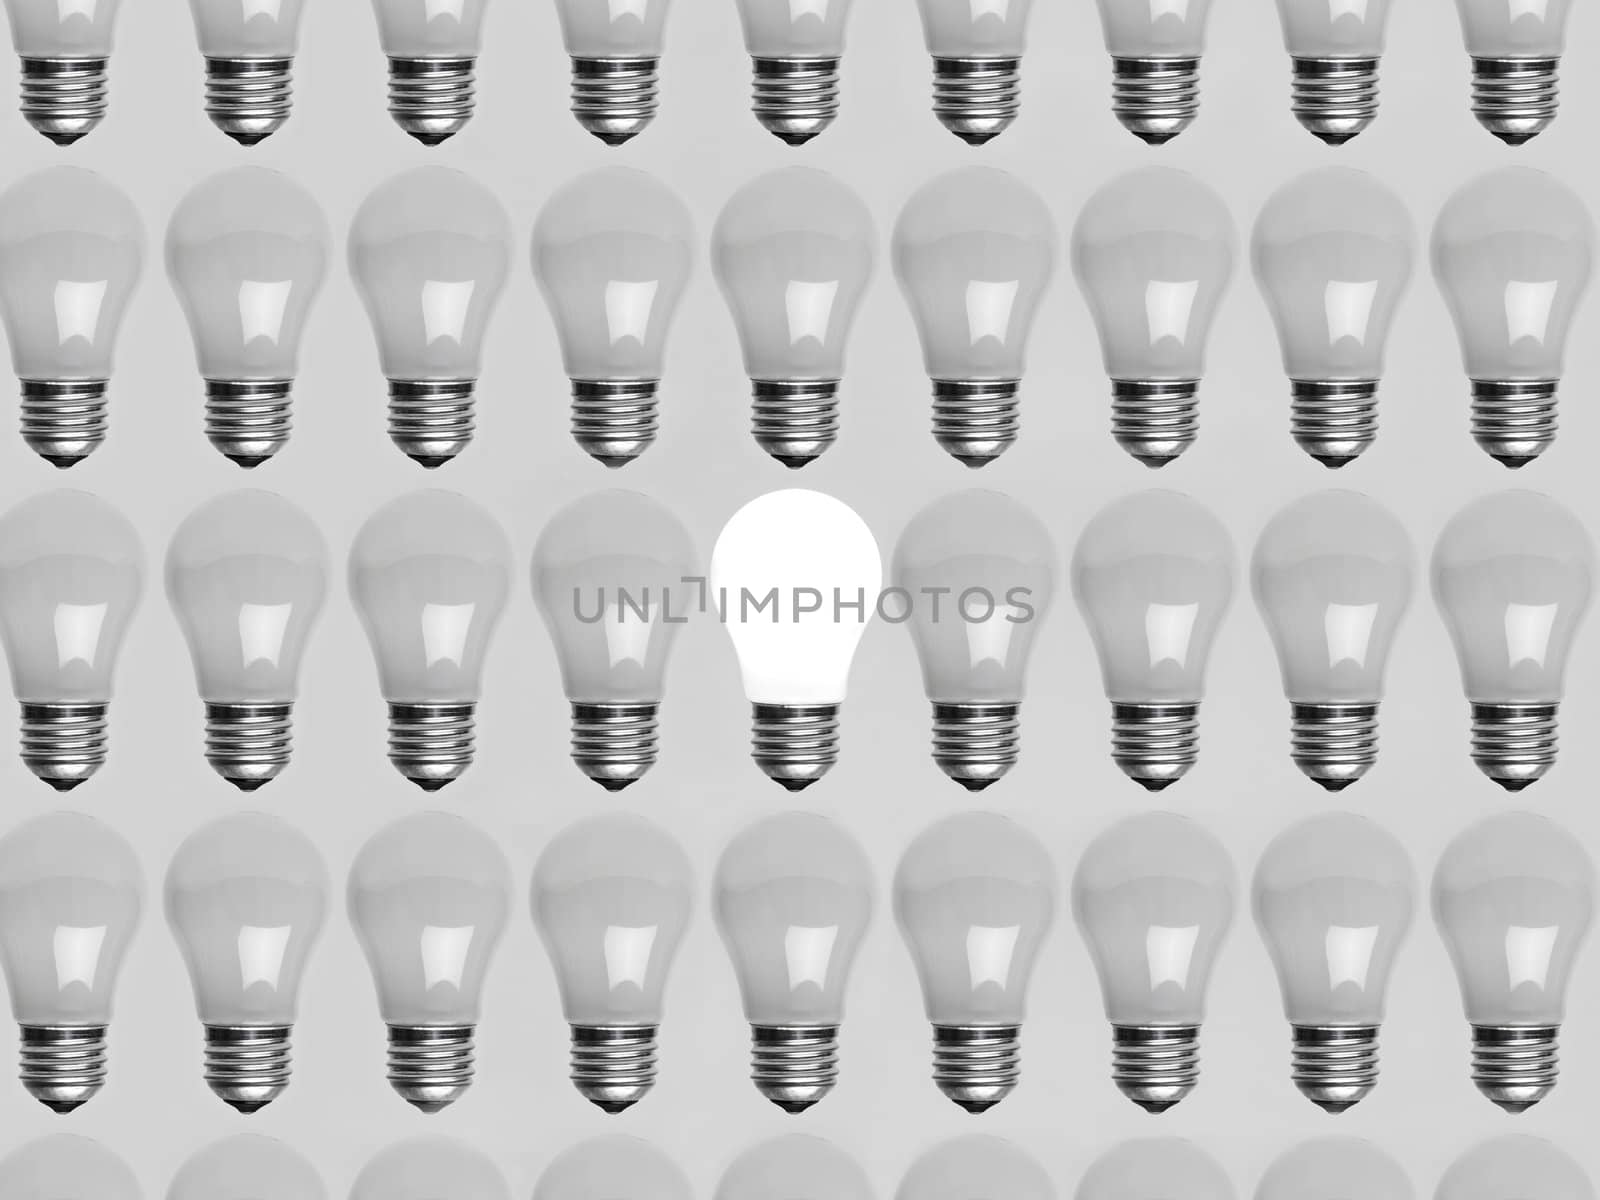 Collage of light bulbs by gemenacom